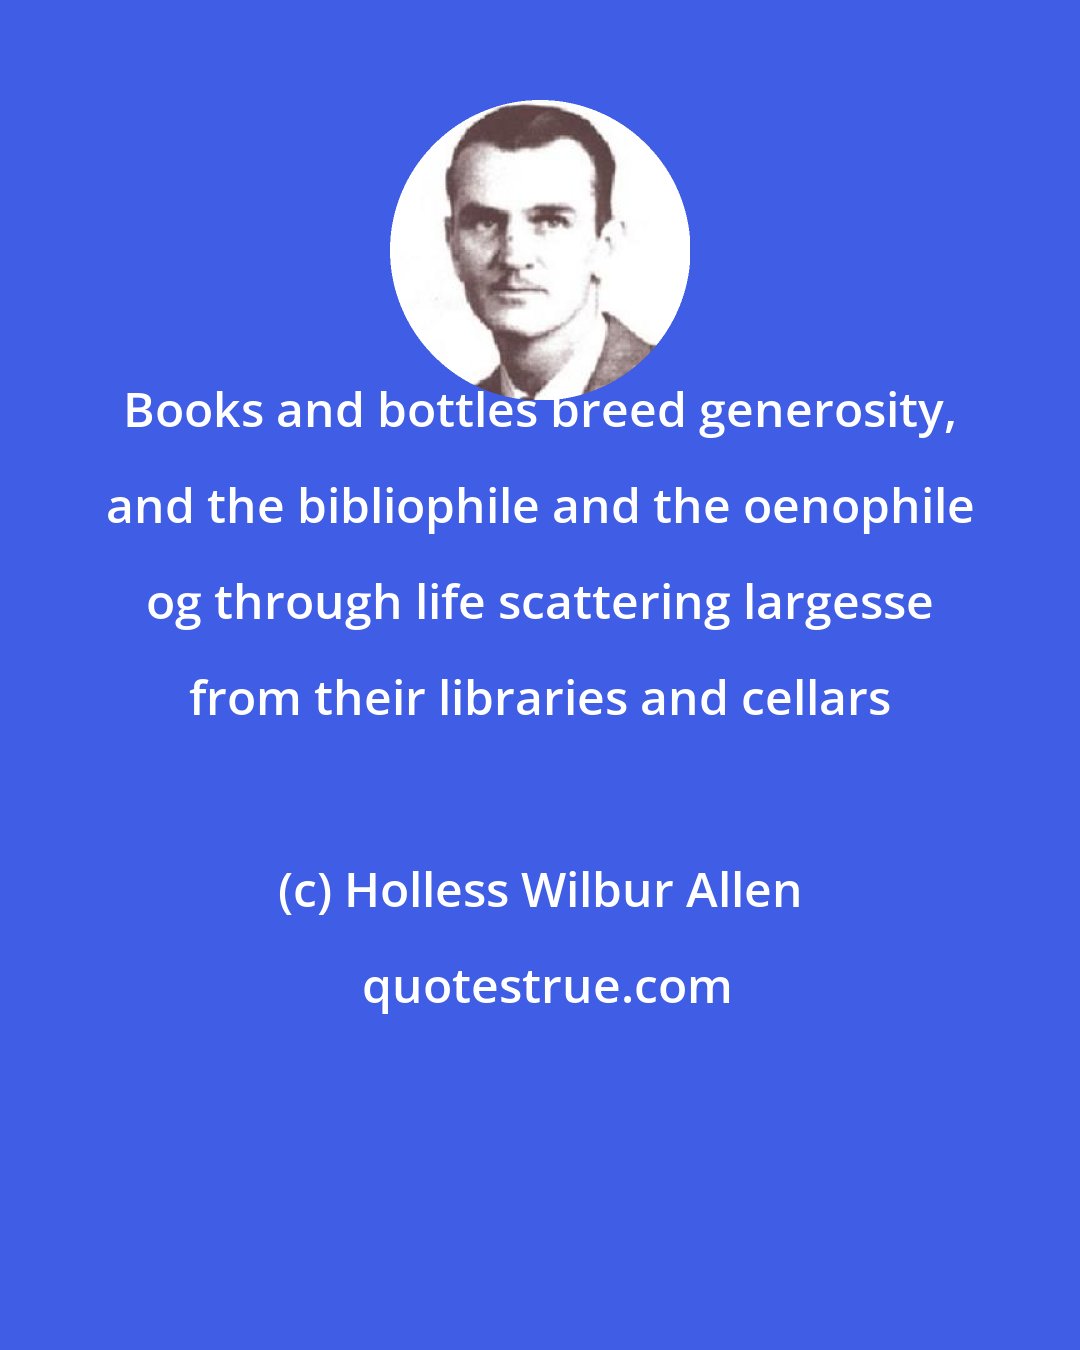 Holless Wilbur Allen: Books and bottles breed generosity, and the bibliophile and the oenophile og through life scattering largesse from their libraries and cellars